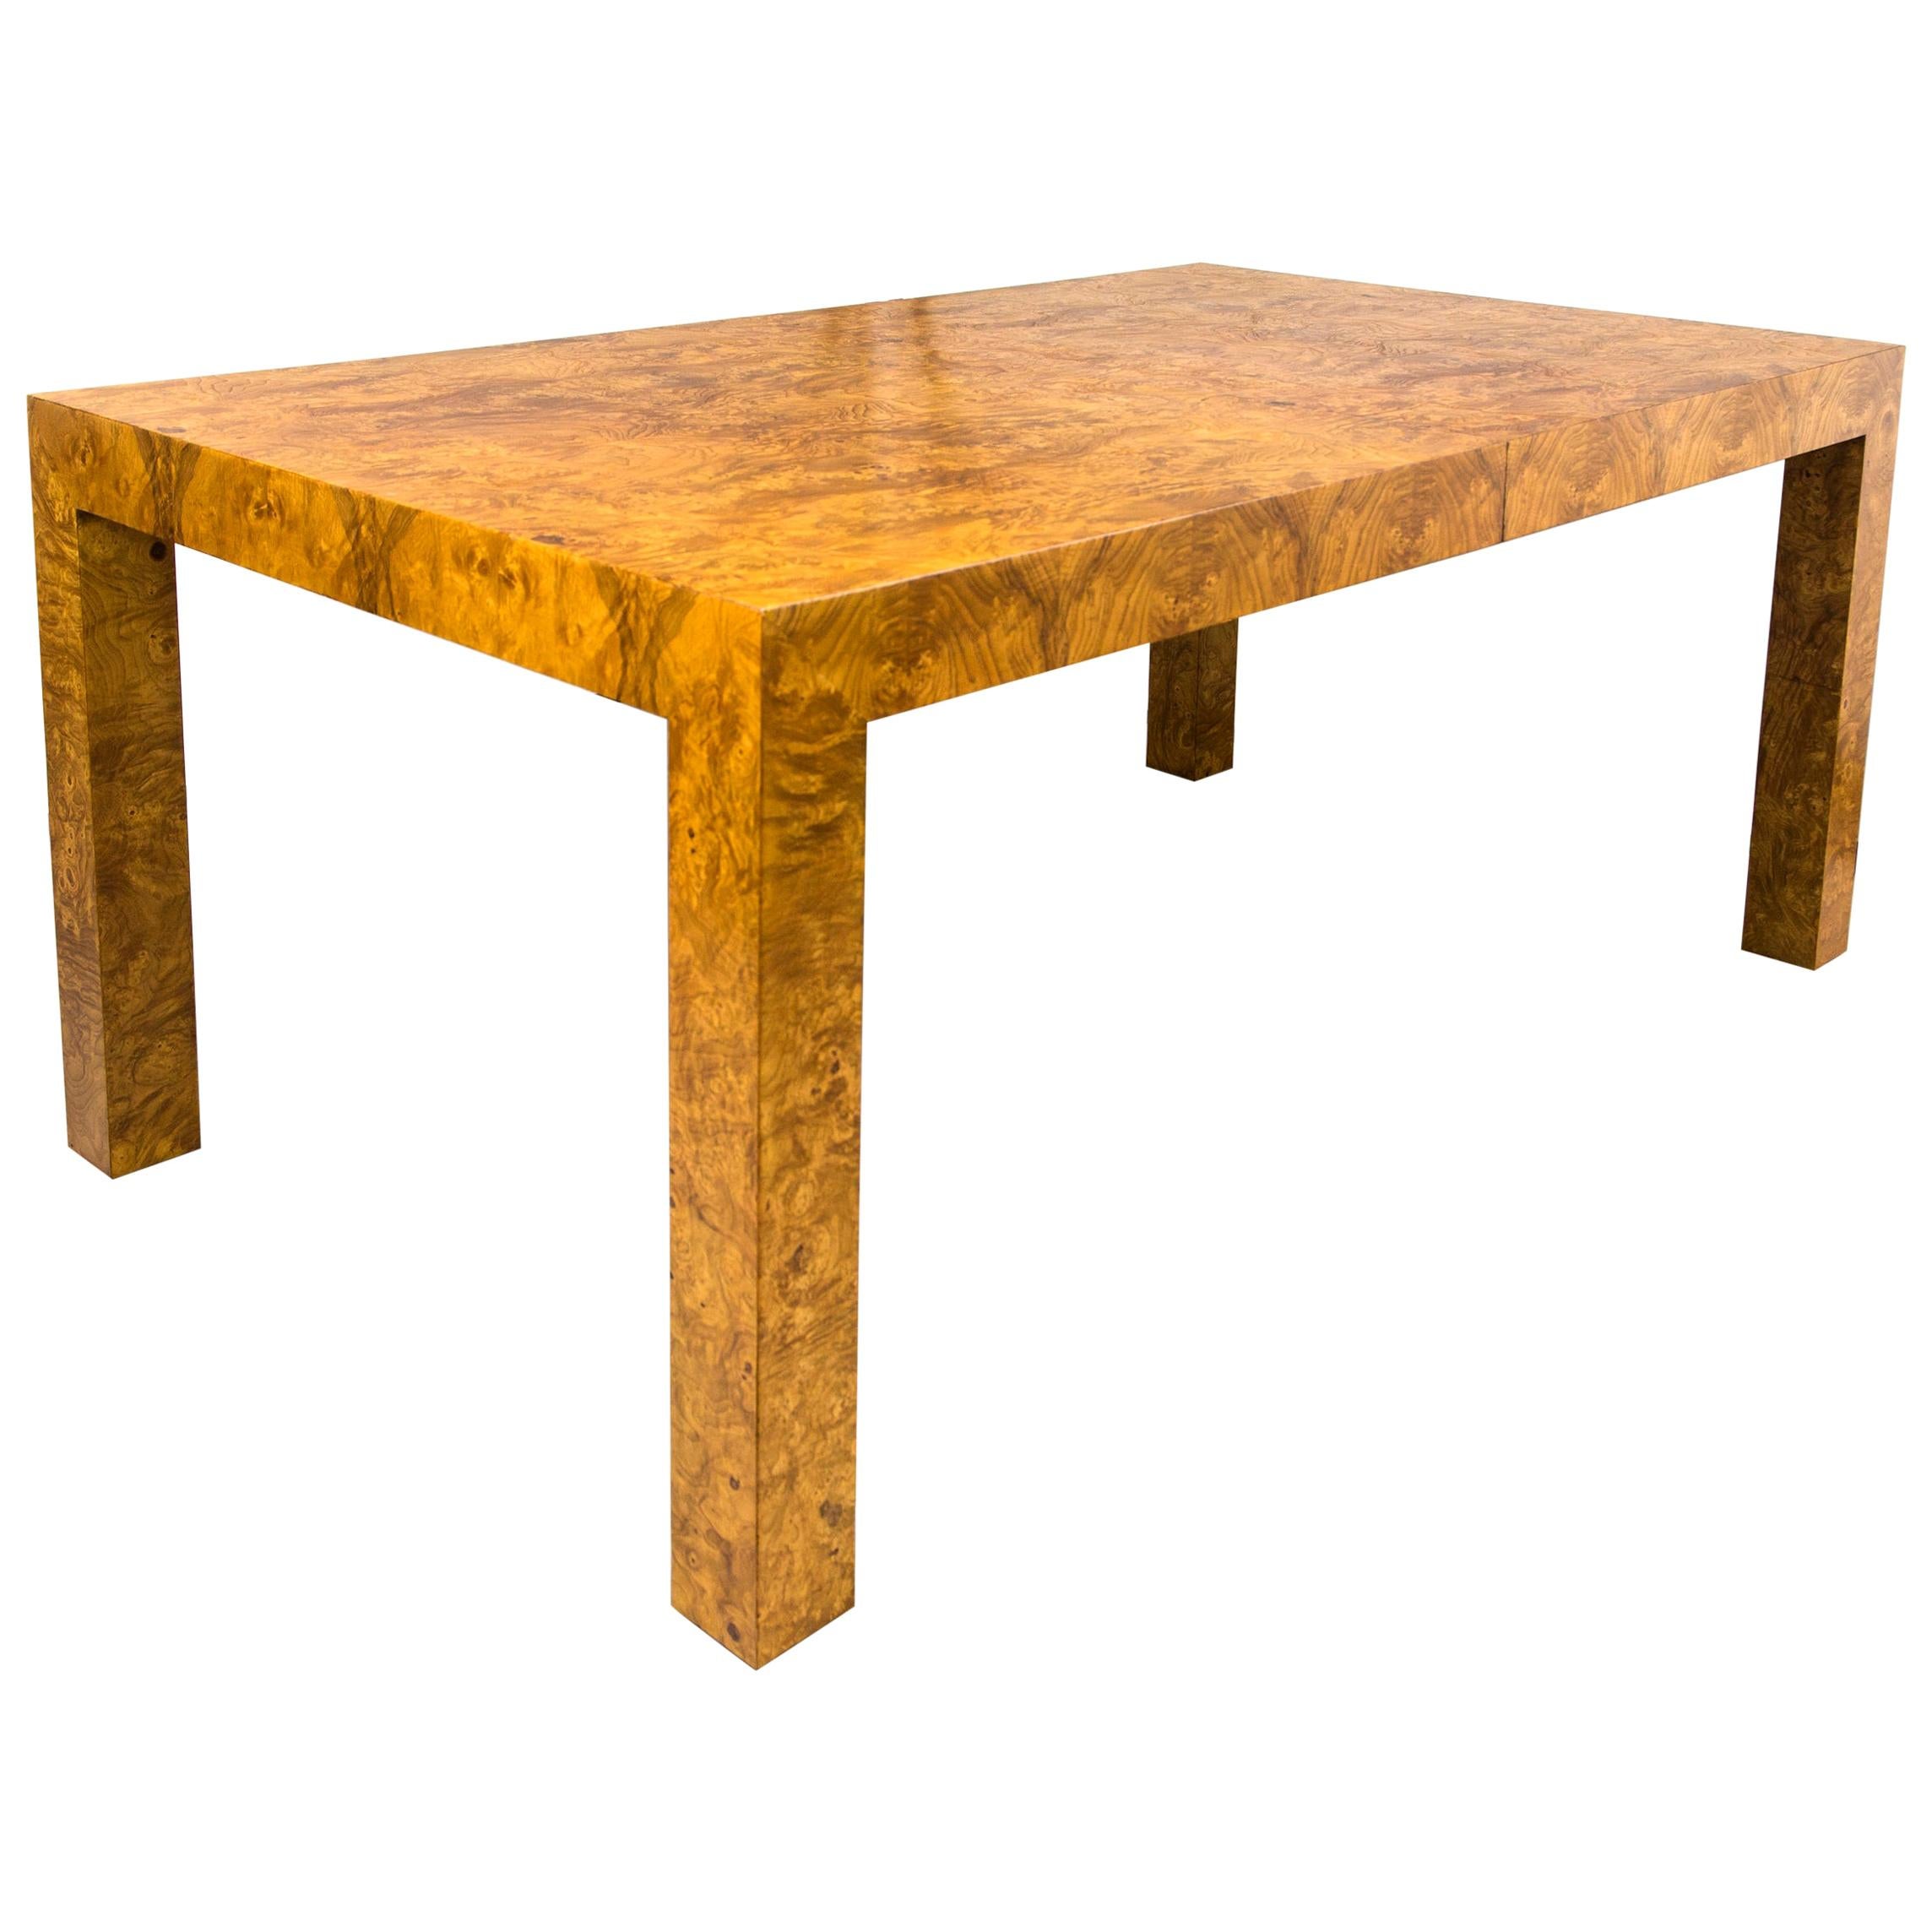 https://a.1stdibscdn.com/milo-baughman-burl-wood-dining-table-with-two-leaves-for-sale/1121189/f_148346821576825164037/14834682_master.jpg